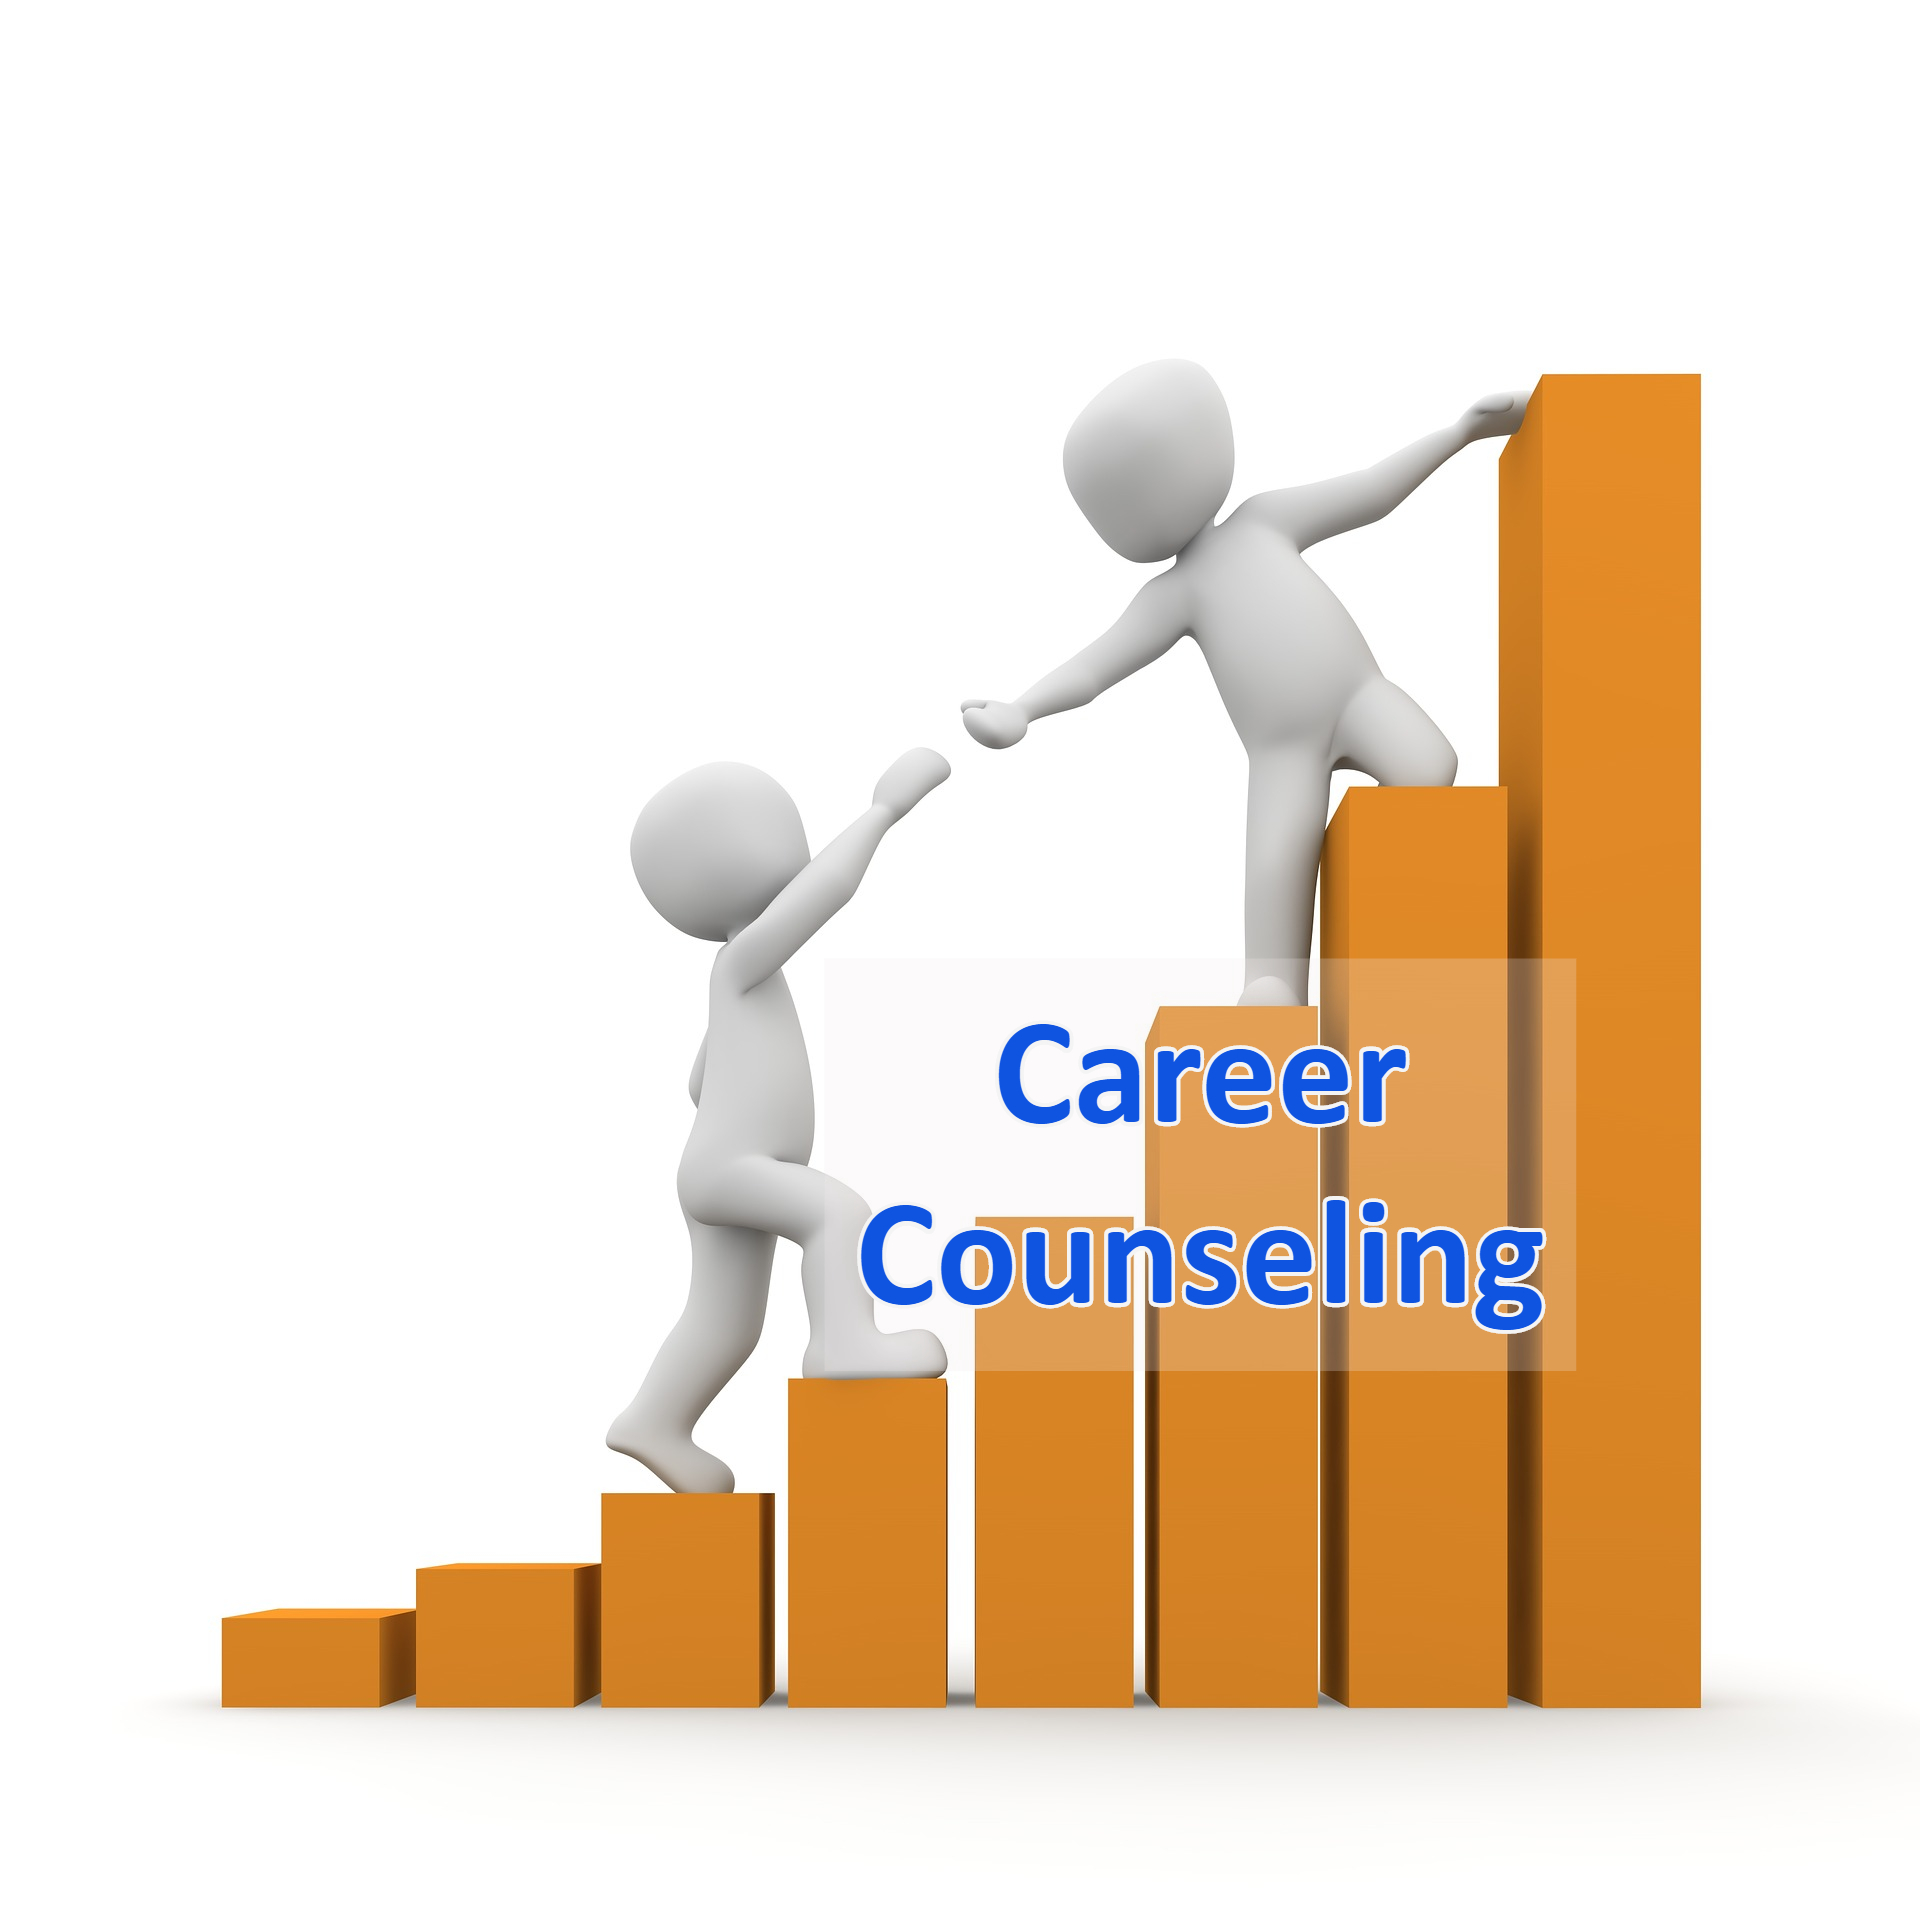 presentation on career counselling